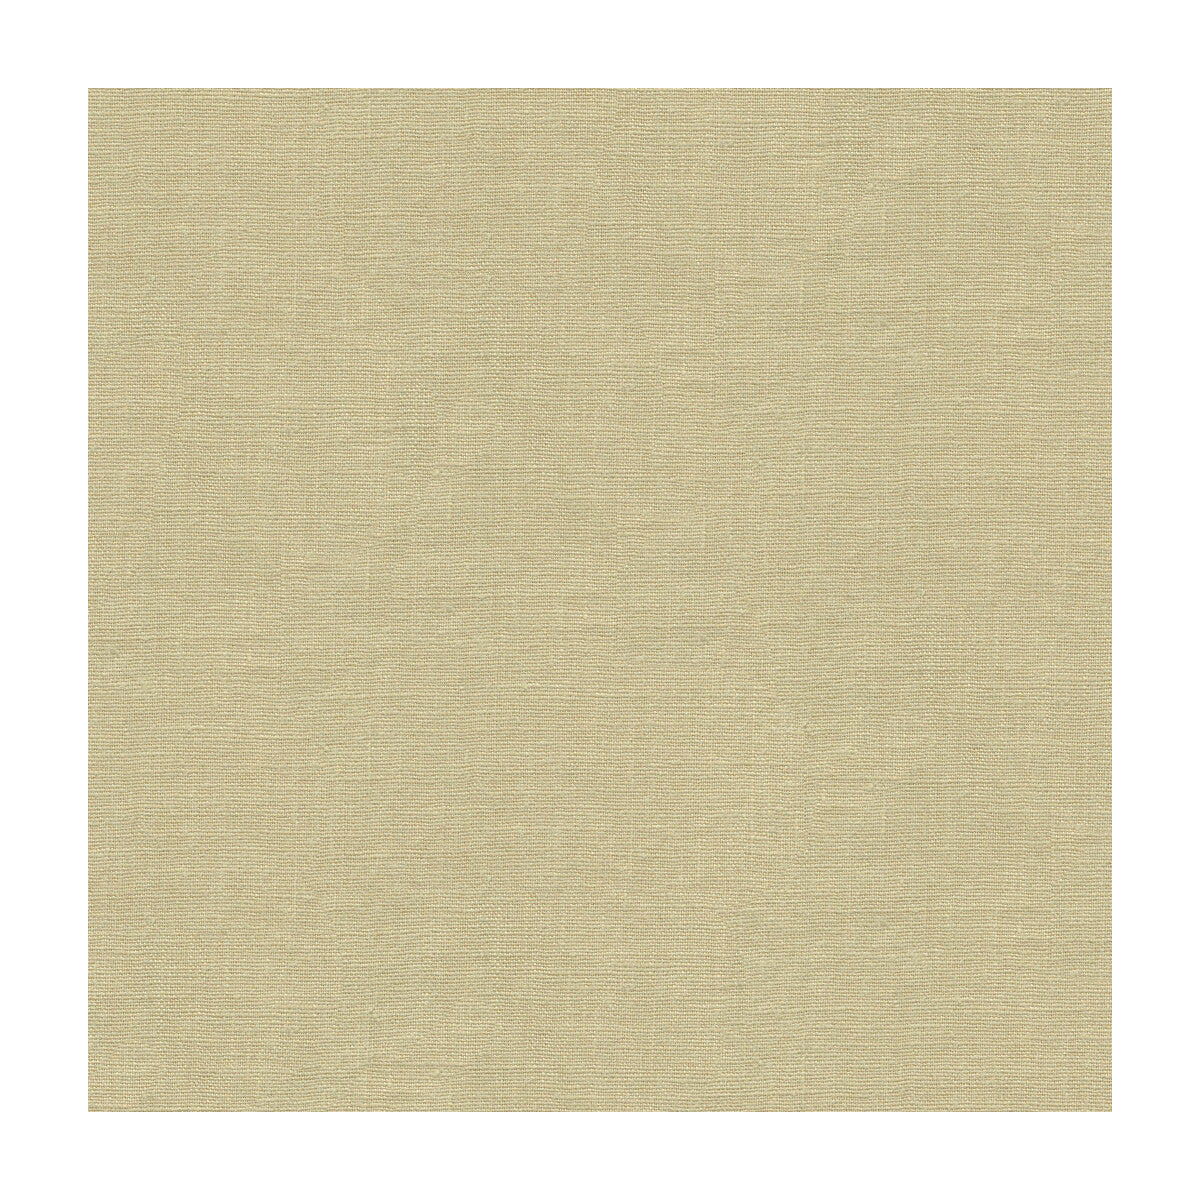 Dublin Linen fabric in natural color - pattern 2012175.616.0 - by Lee Jofa in the Colour Complements II collection